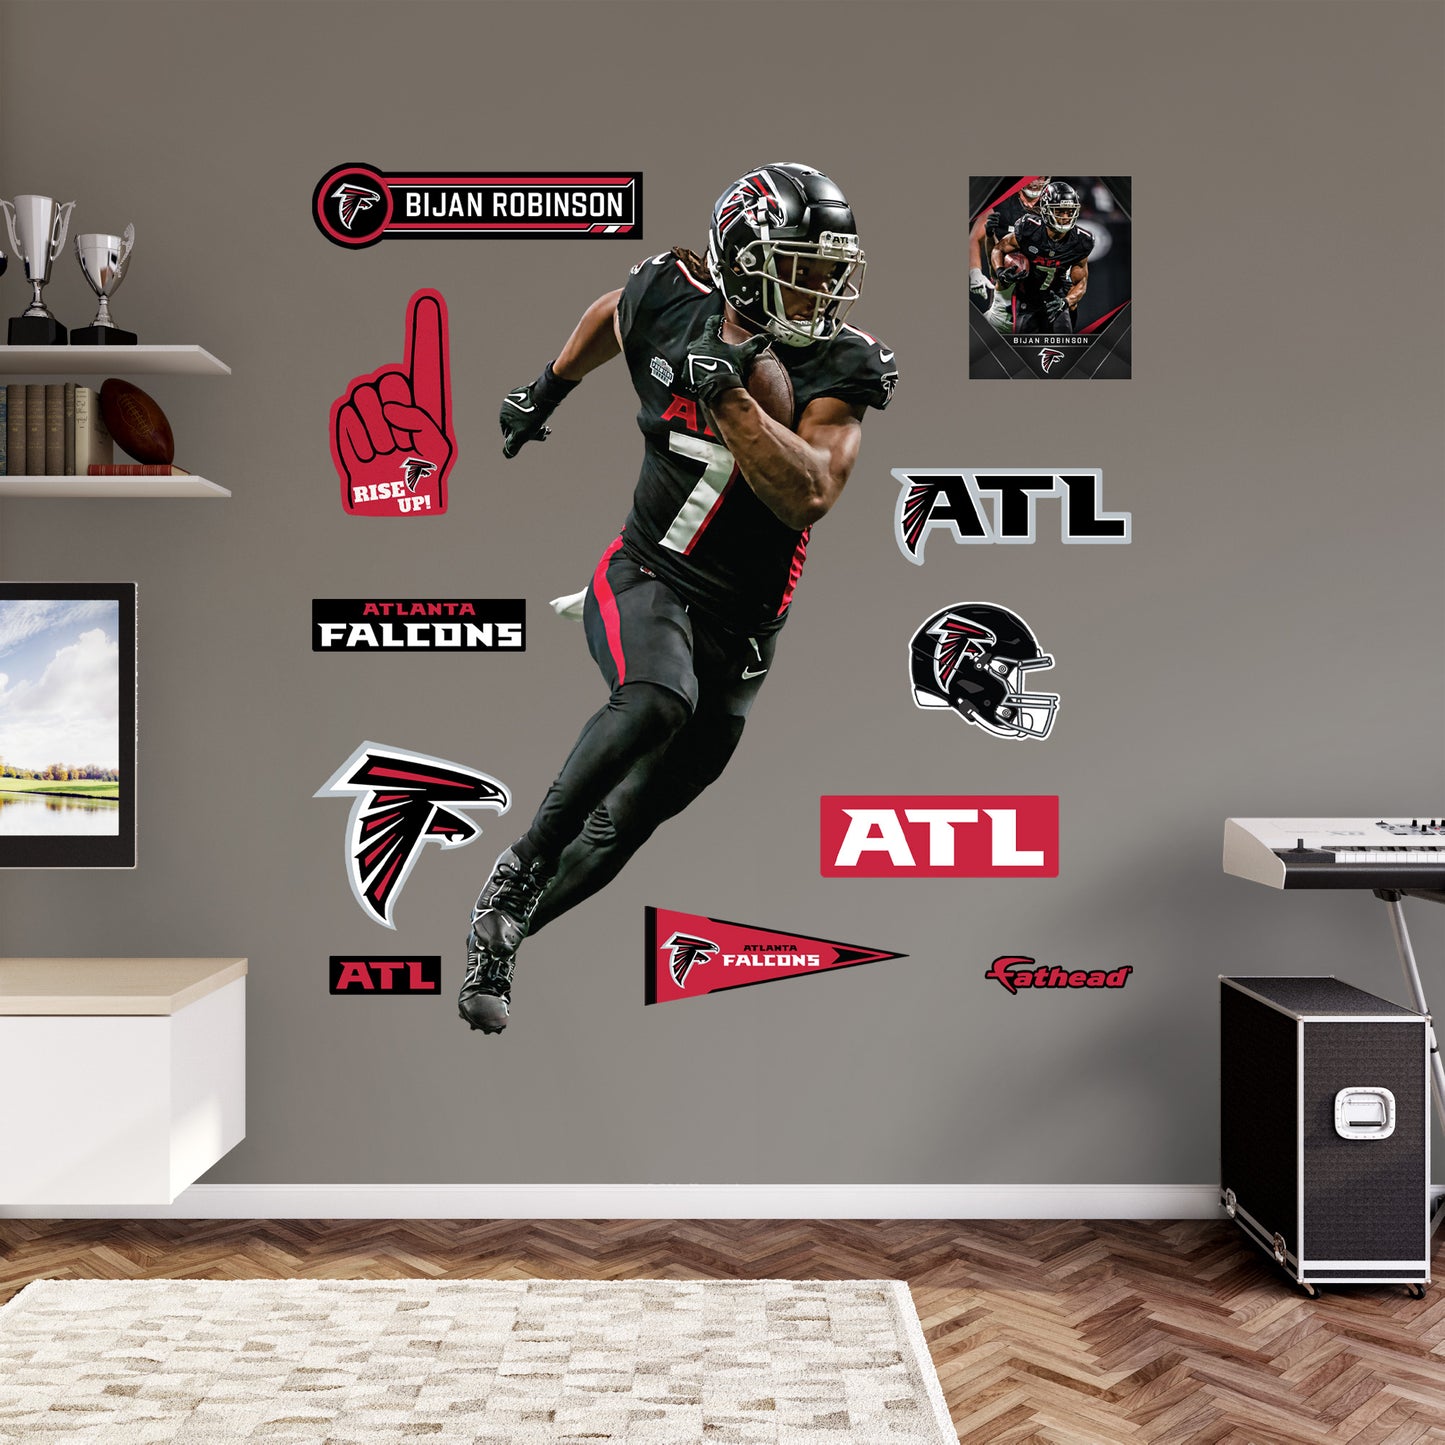 Atlanta Falcons: Bijan Robinson         - Officially Licensed NFL Removable     Adhesive Decal